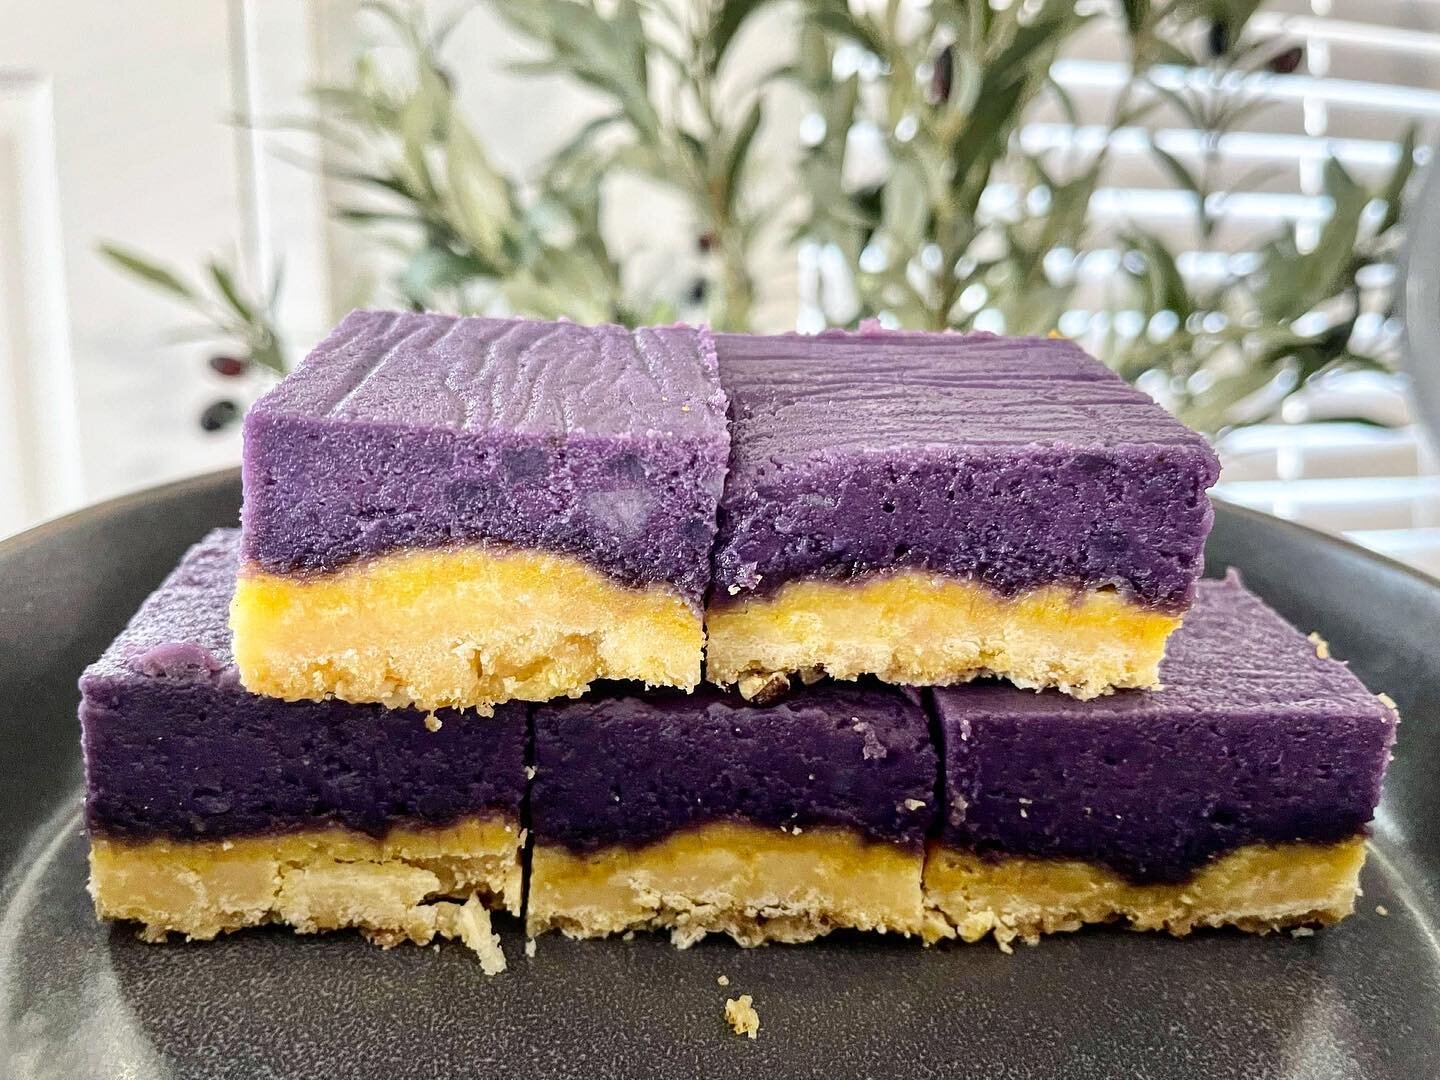 DESSERT OF THE WEEK: Okinawan Sweet Potato Crunch 🍠

Available this week only in our takeout window, this dessert showcases our Okinawan heritage. We will have a limited supply this week so come early to get yours! These are first come first serve👍